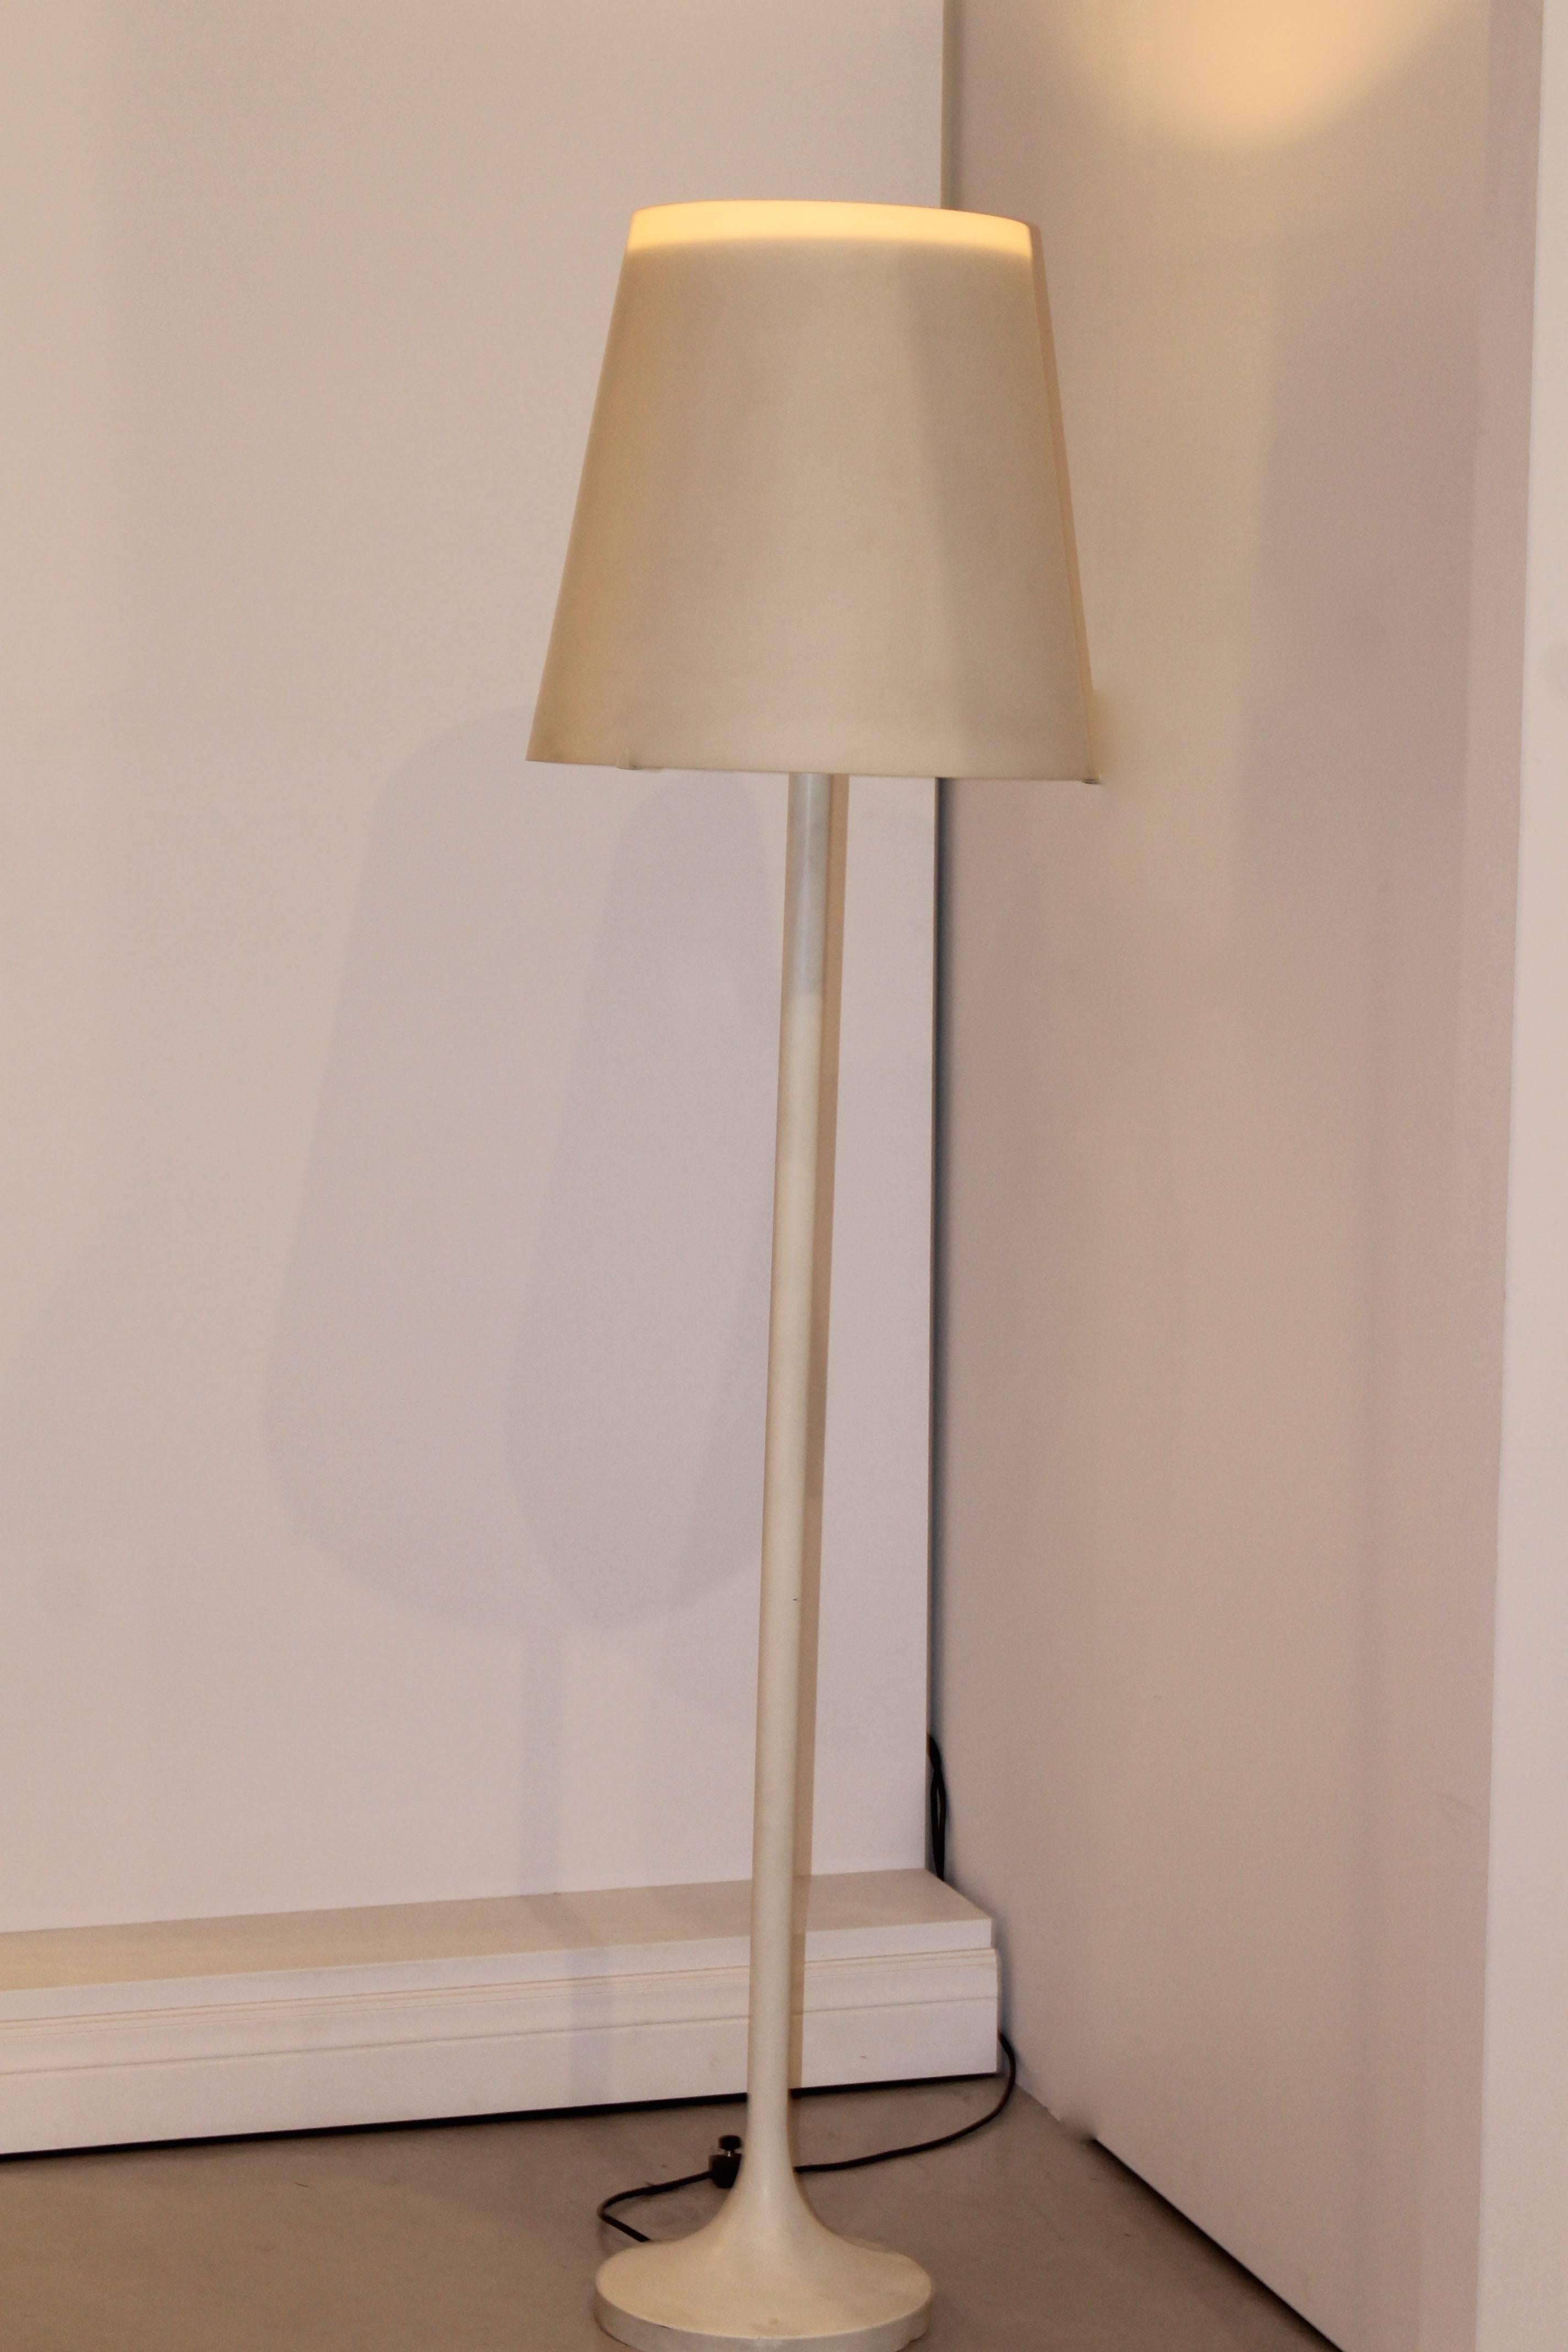 Important floor lamp by Fontana Arte. Lampshade in glass, double possibility of illumination: On the top, in the middle or both.
In excellent conditions.